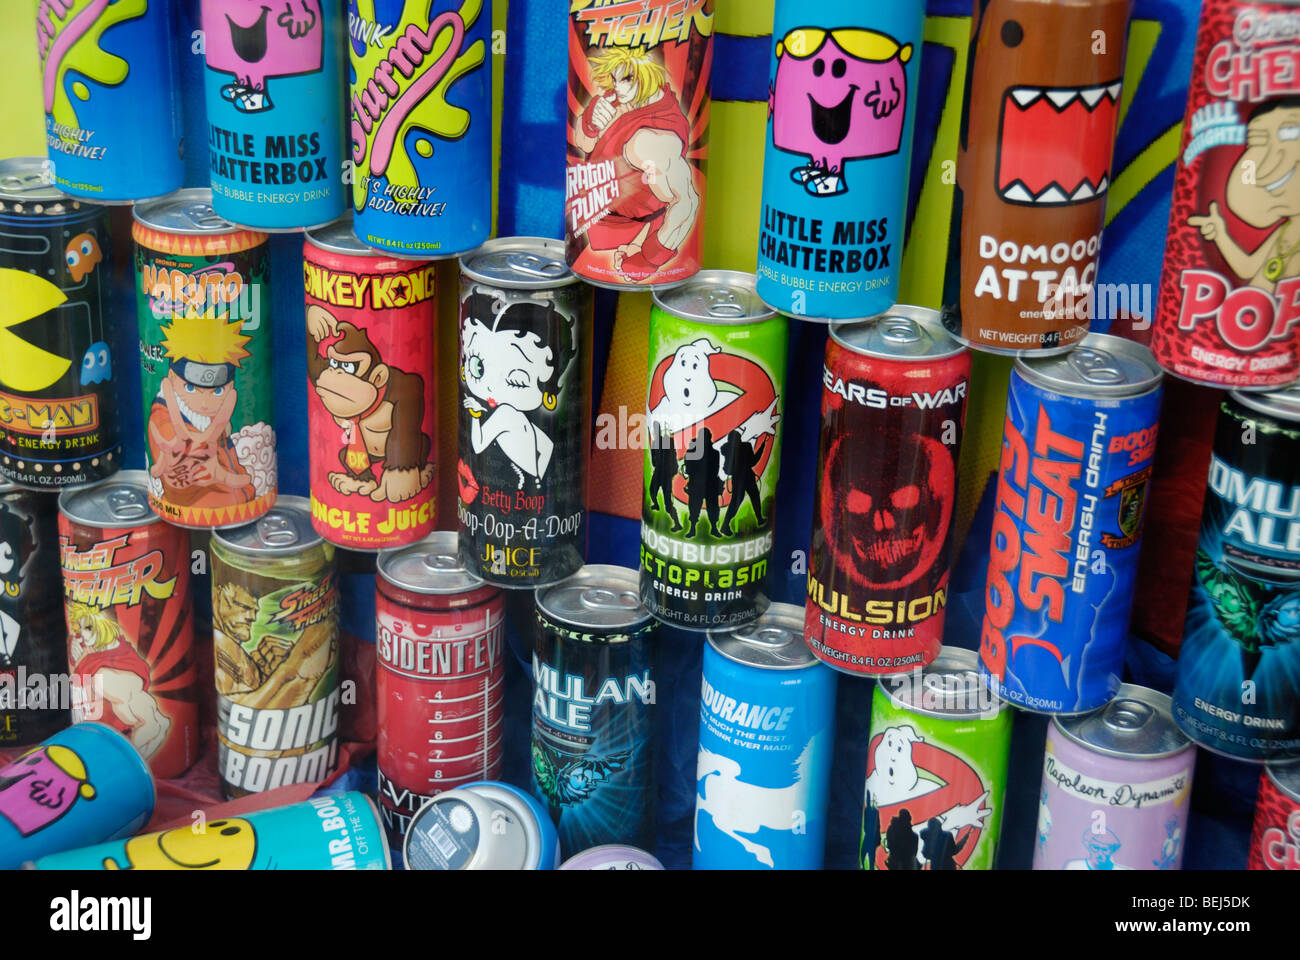 Cartoon characters on colourful drink cans in a shop window display Stock Photo